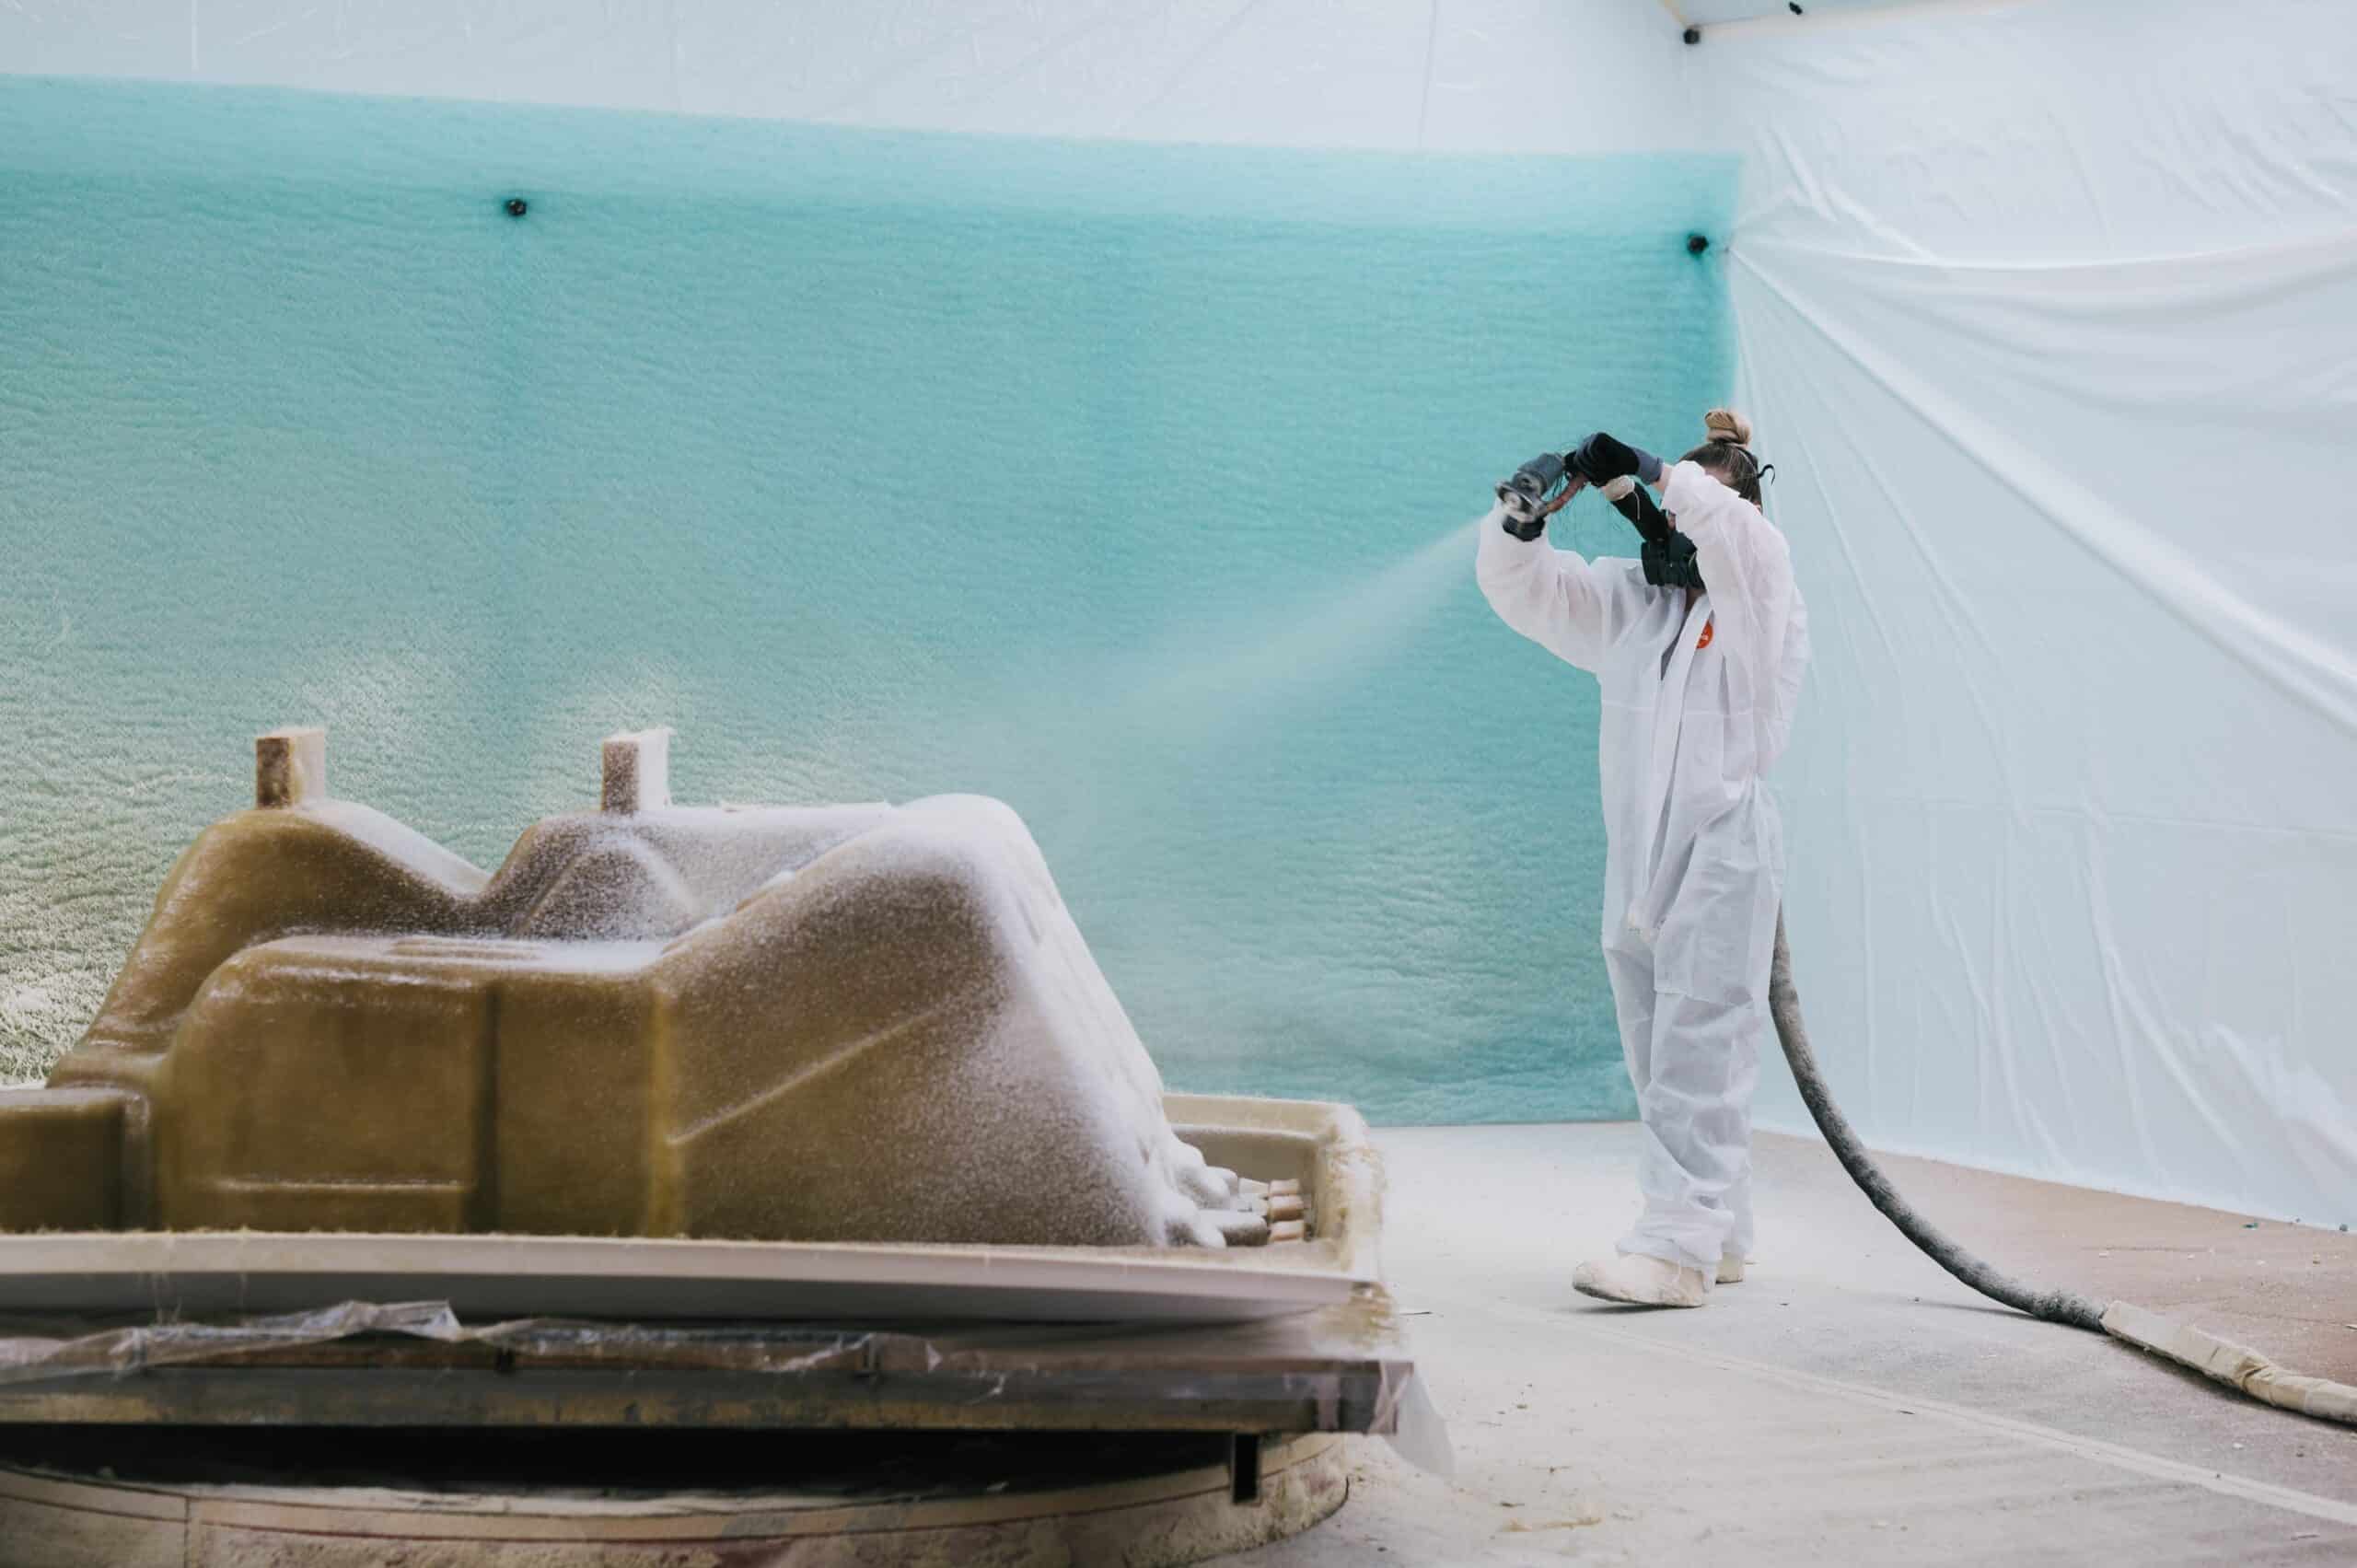 Manufacturing process of a hot tub, sprayed with polyurethane for thermal insulation